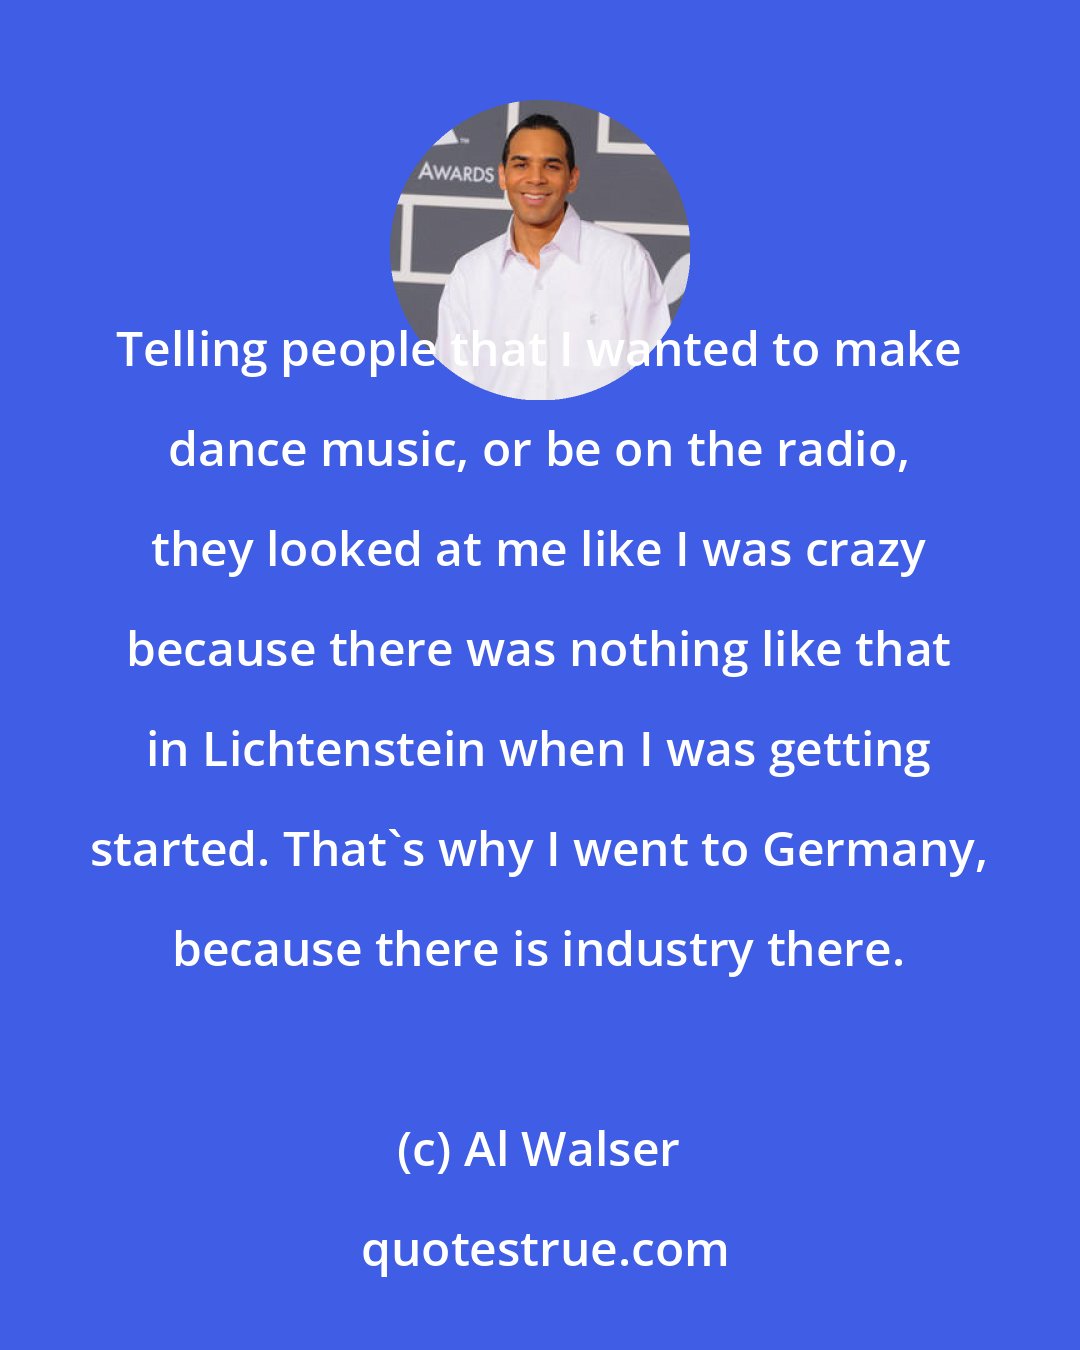 Al Walser: Telling people that I wanted to make dance music, or be on the radio, they looked at me like I was crazy because there was nothing like that in Lichtenstein when I was getting started. That's why I went to Germany, because there is industry there.